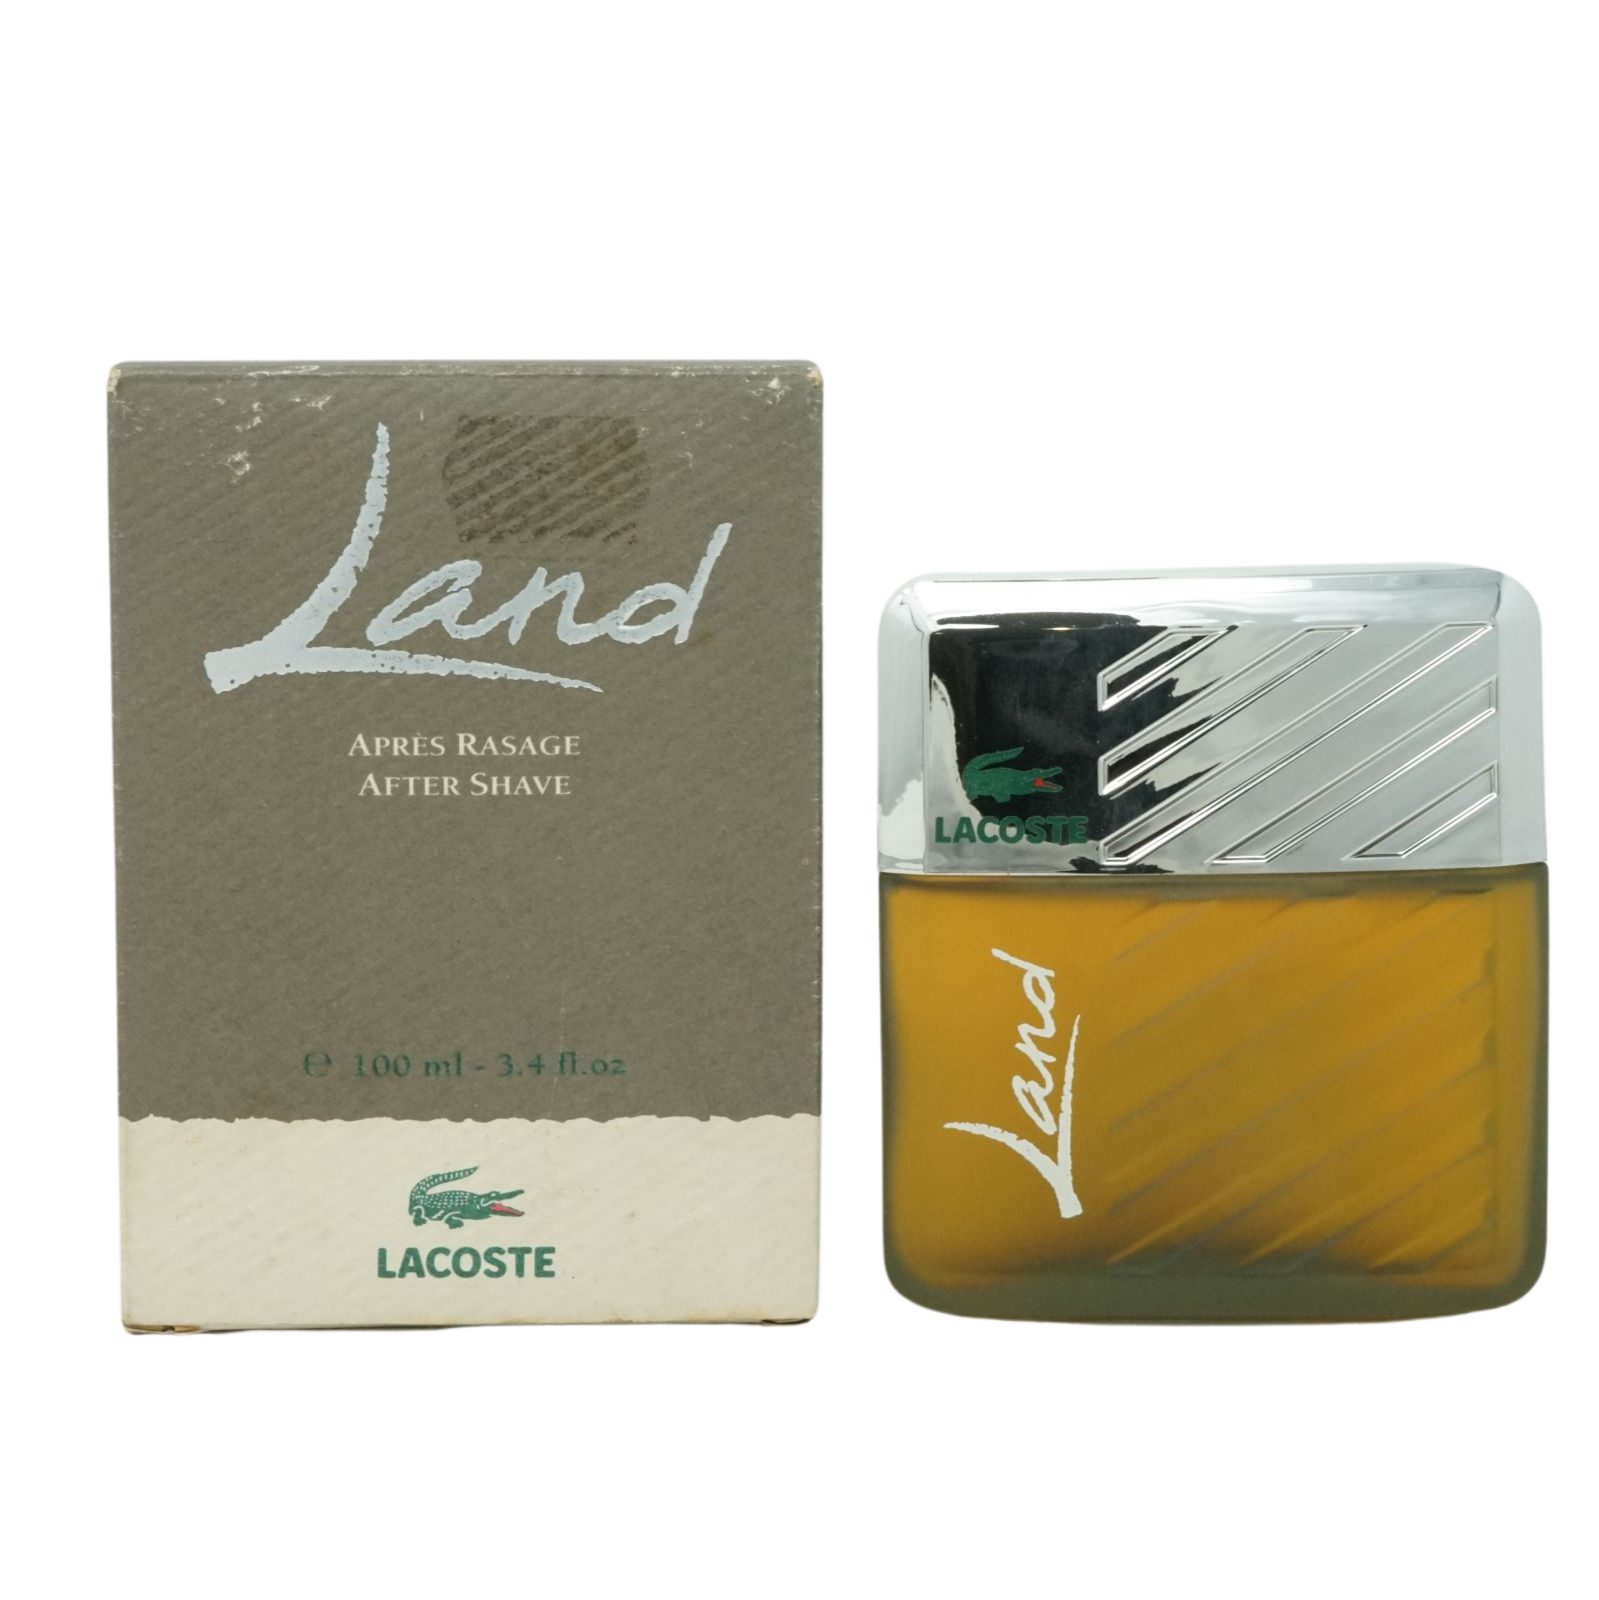 Lacoste After Shave 100ml Land Lacoste After-Shave